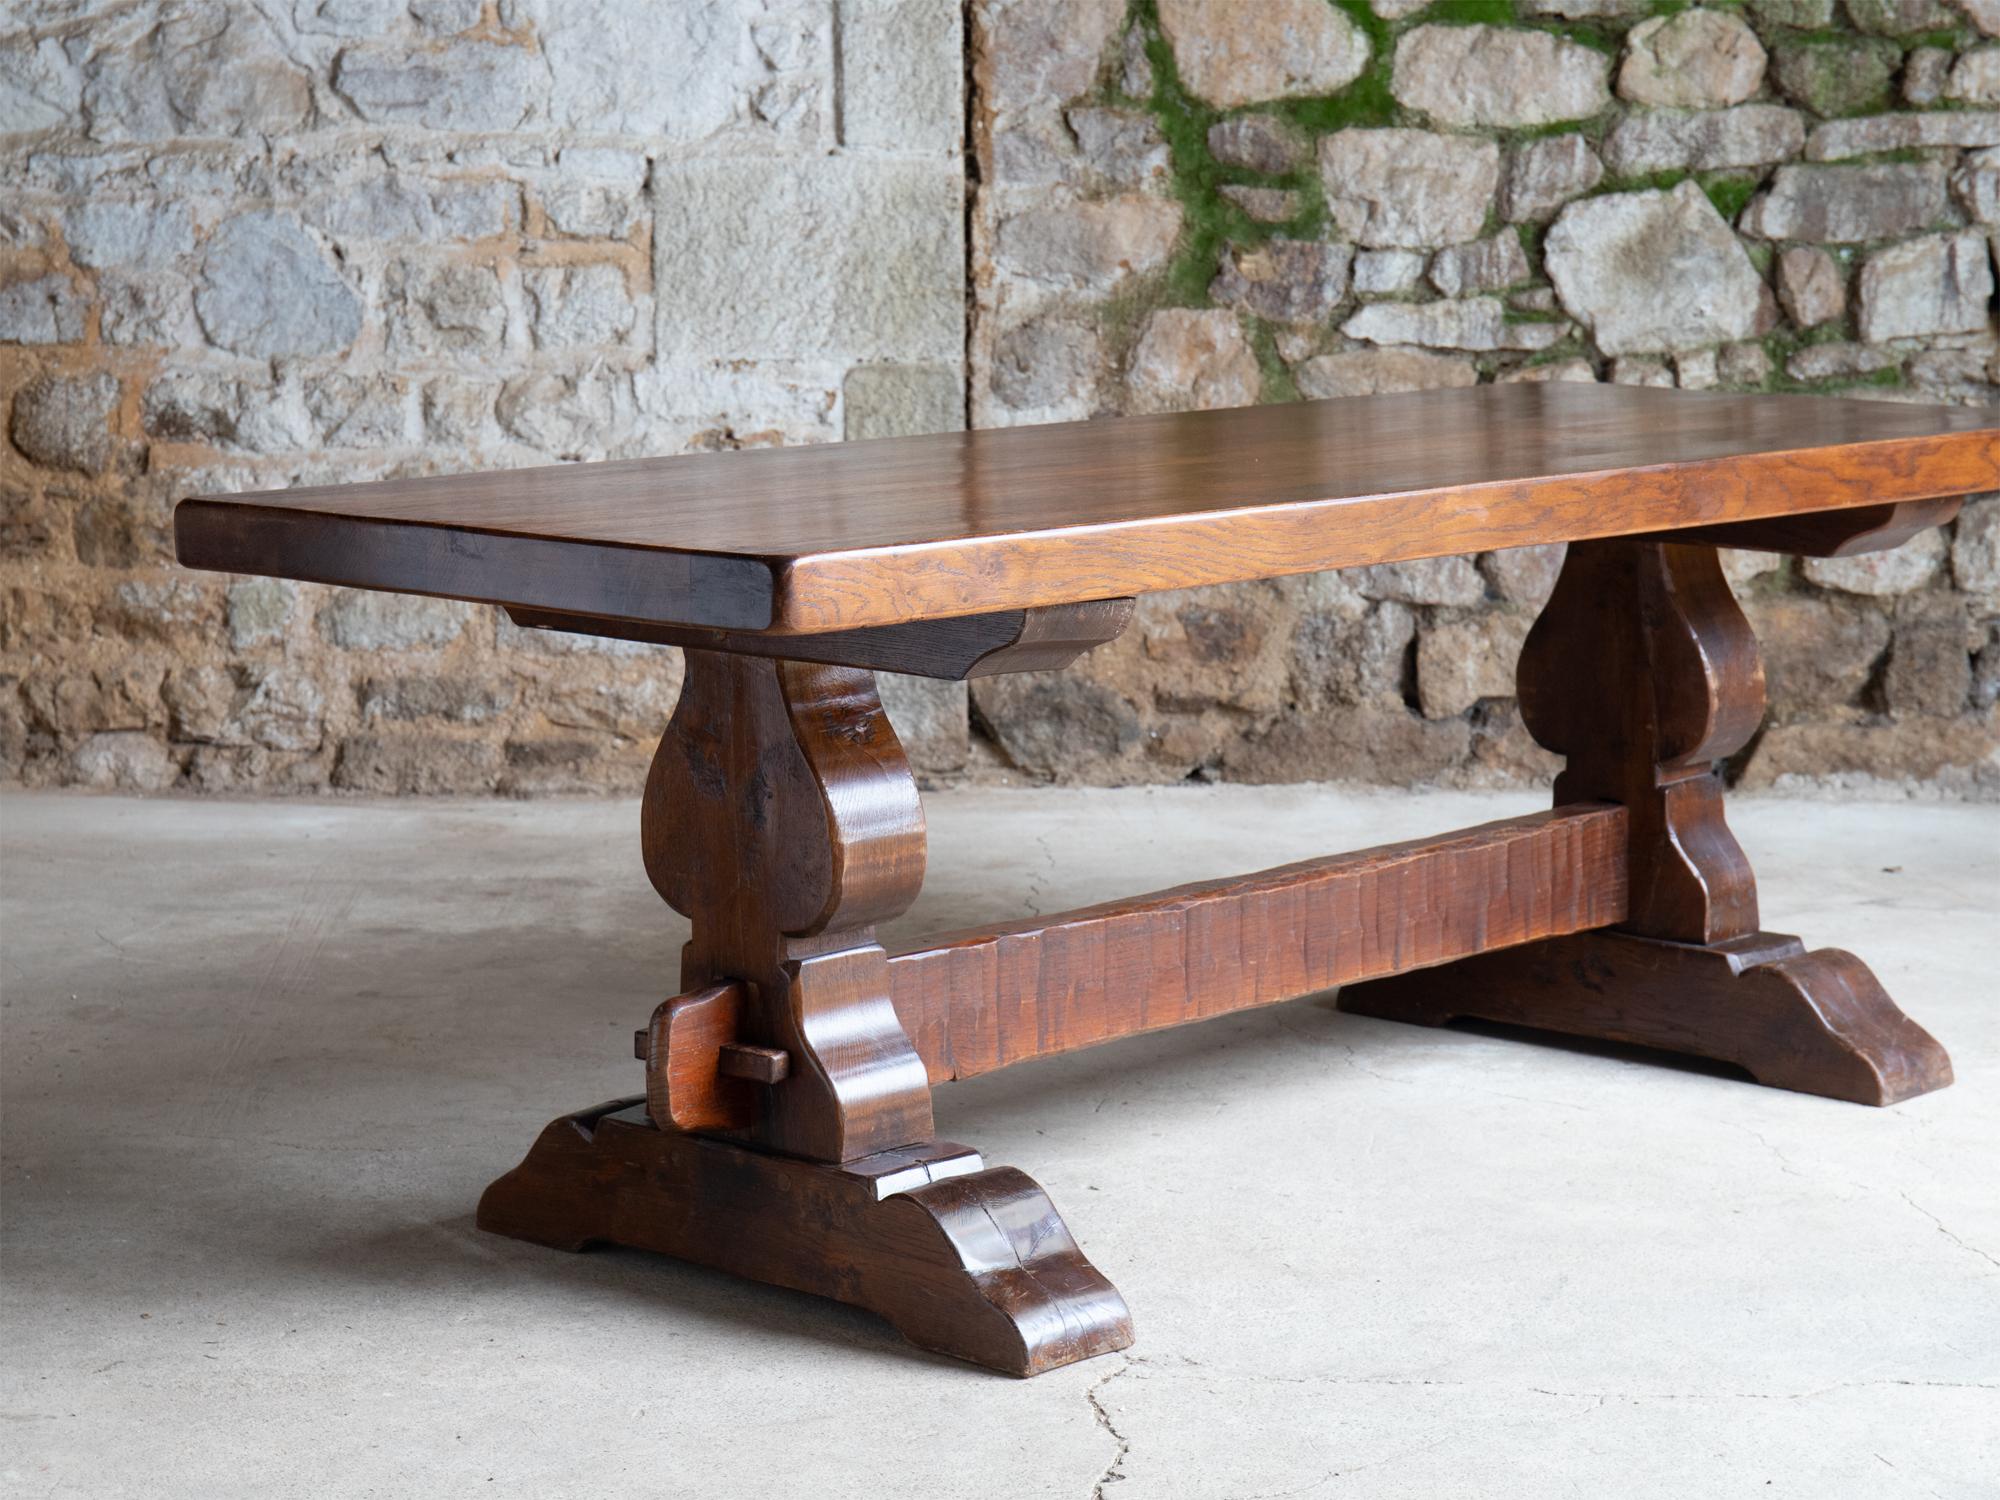 A brutalist oak monastic style dining table. French, c. 1960s.

A very heavy and solid piece. Nominal age-related wear.

76.5 x 221.5 x 81 cm (30.1 x 87.2 x 31.9 